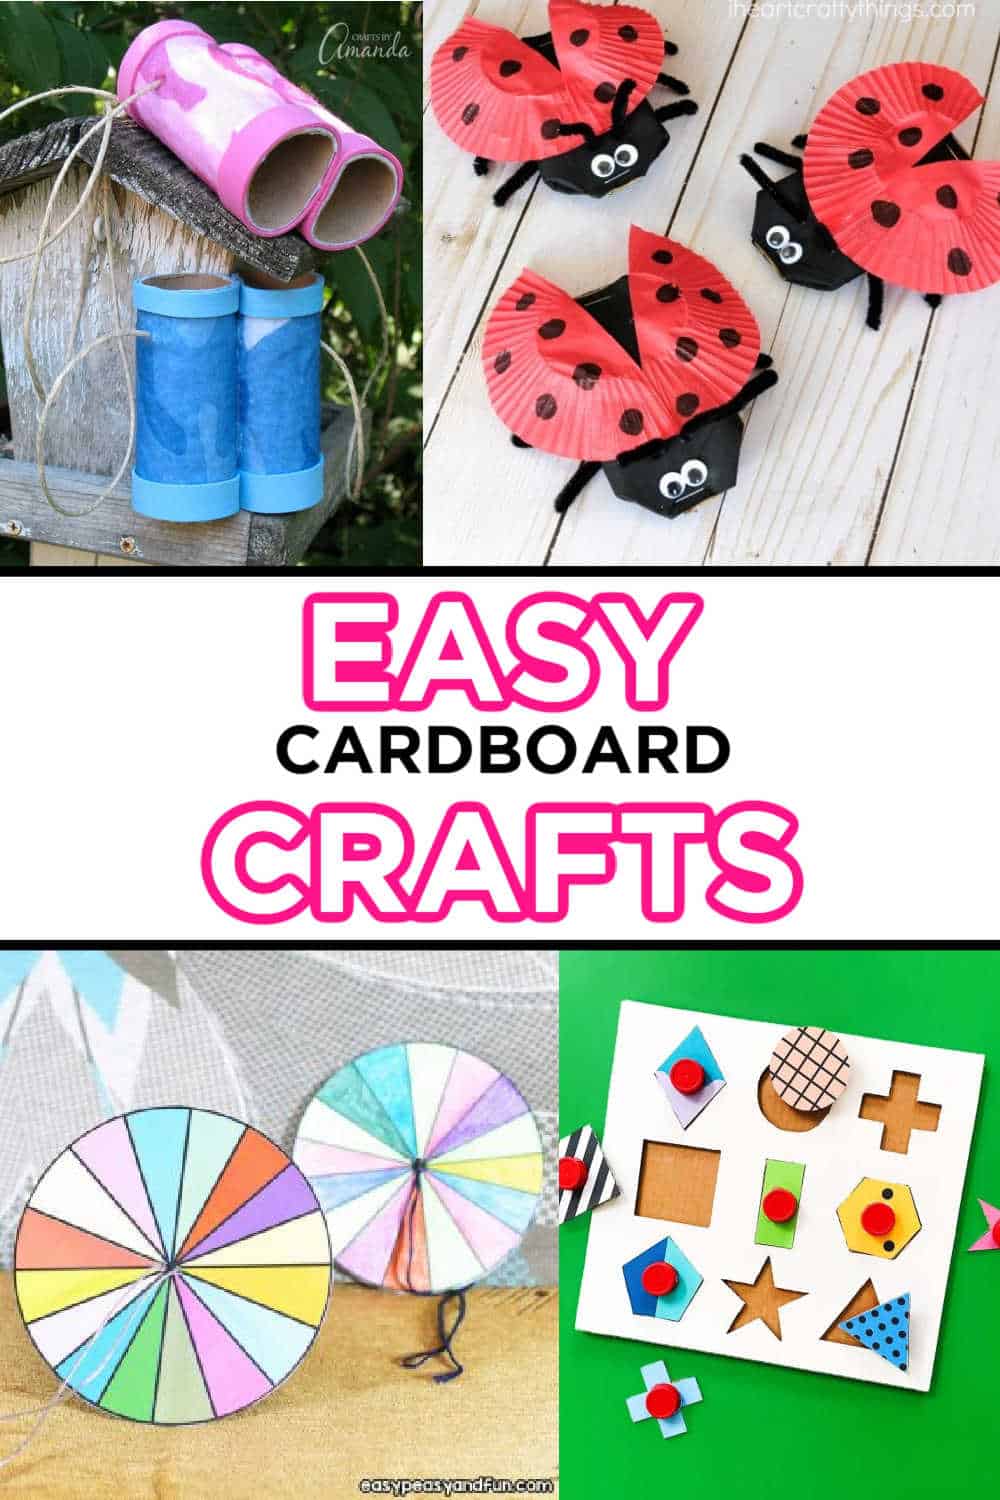 21+ Easy Cardboard Crafts For Kids - Made with HAPPY